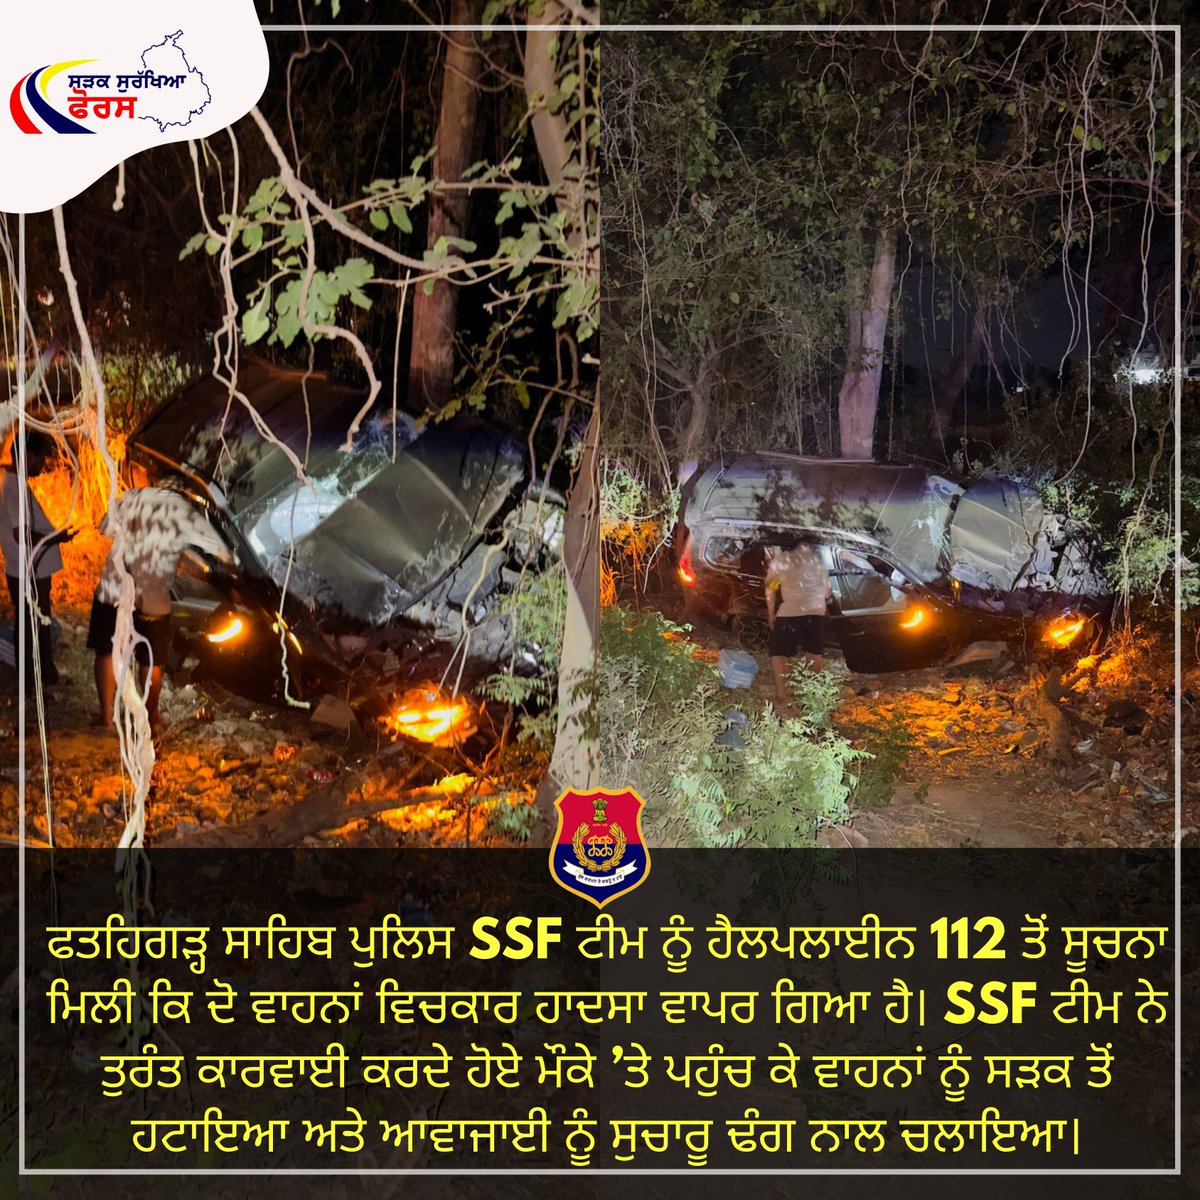 Sri Fatehgarh Sahib police #SSF team received information from #Helpline112 that an accident had occurred between two vehicles. The SSF team took immediate action, reached the spot, removed the vehicles from the road, and made the traffic flow smoothly. #SadakSurakhiyaForce